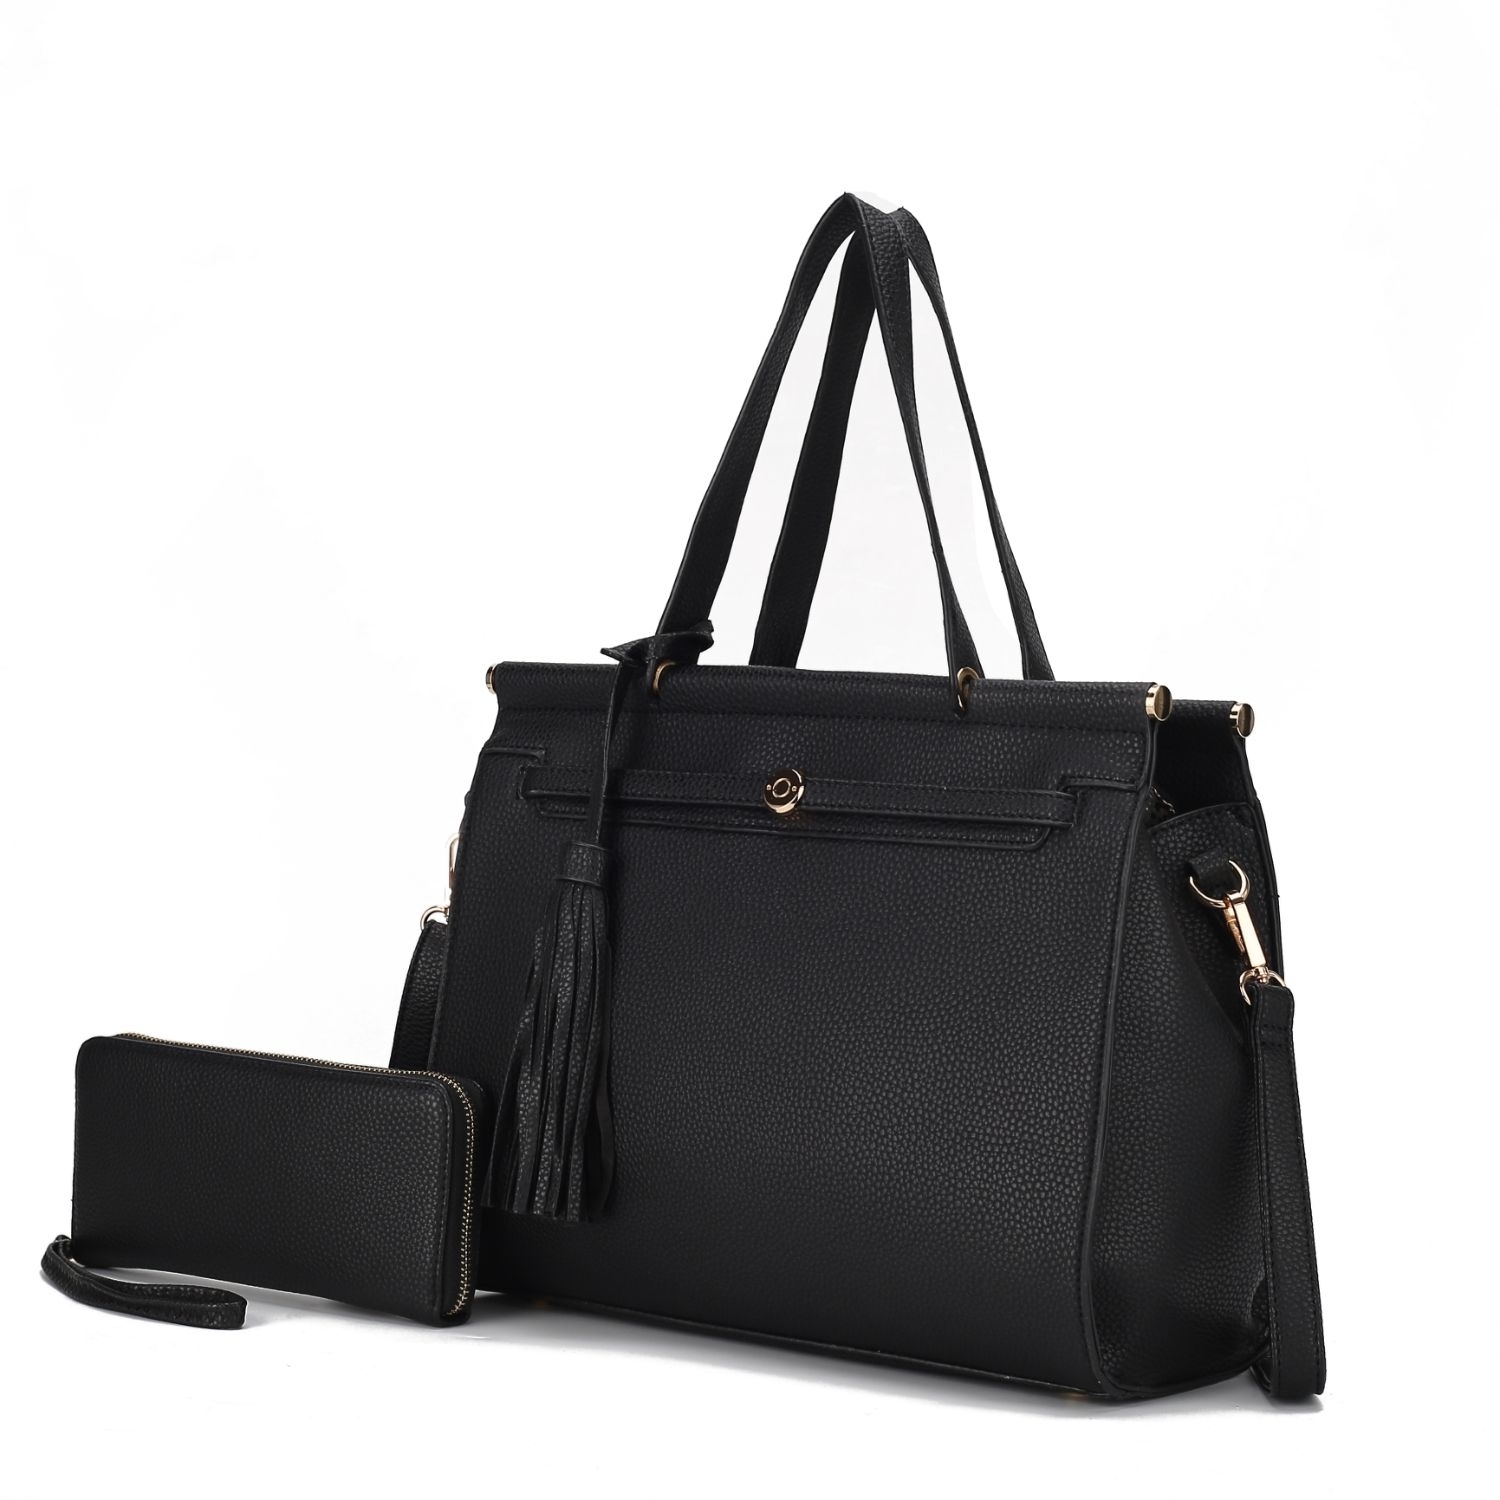 MKF Collection Shelby Vegan Leather Women's Satchel Bag By Mia K With Wallet -2 Pieces - Black